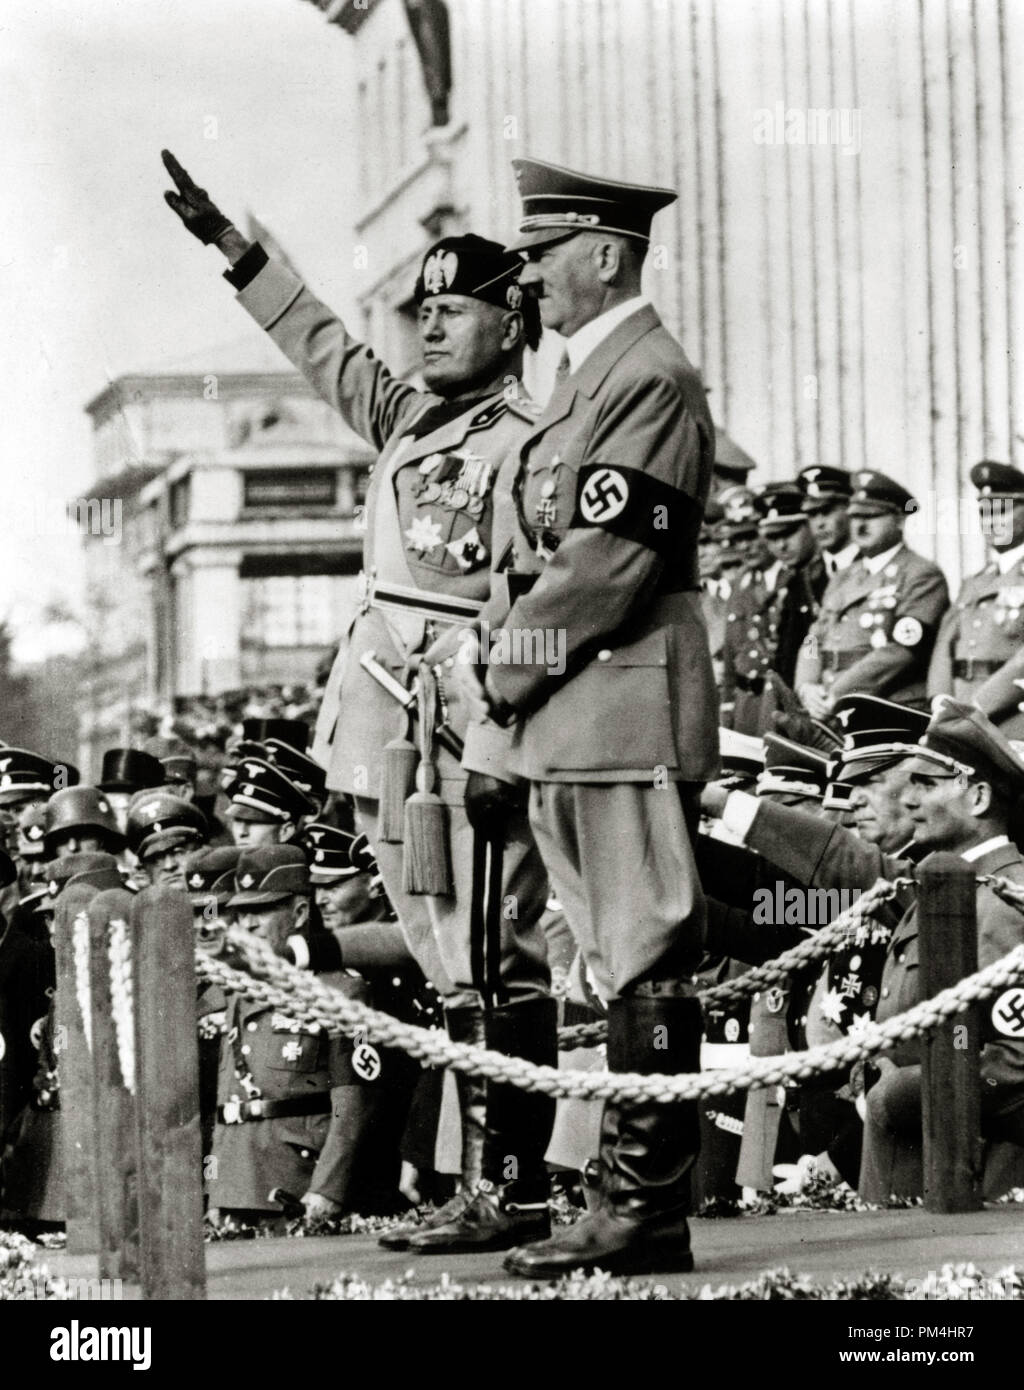 Italian dictator Benito Mussolini and German dictator Adolf Hitler during a parade in Munich, Germany circa 1940.  File Reference # 1003 395THA Stock Photo